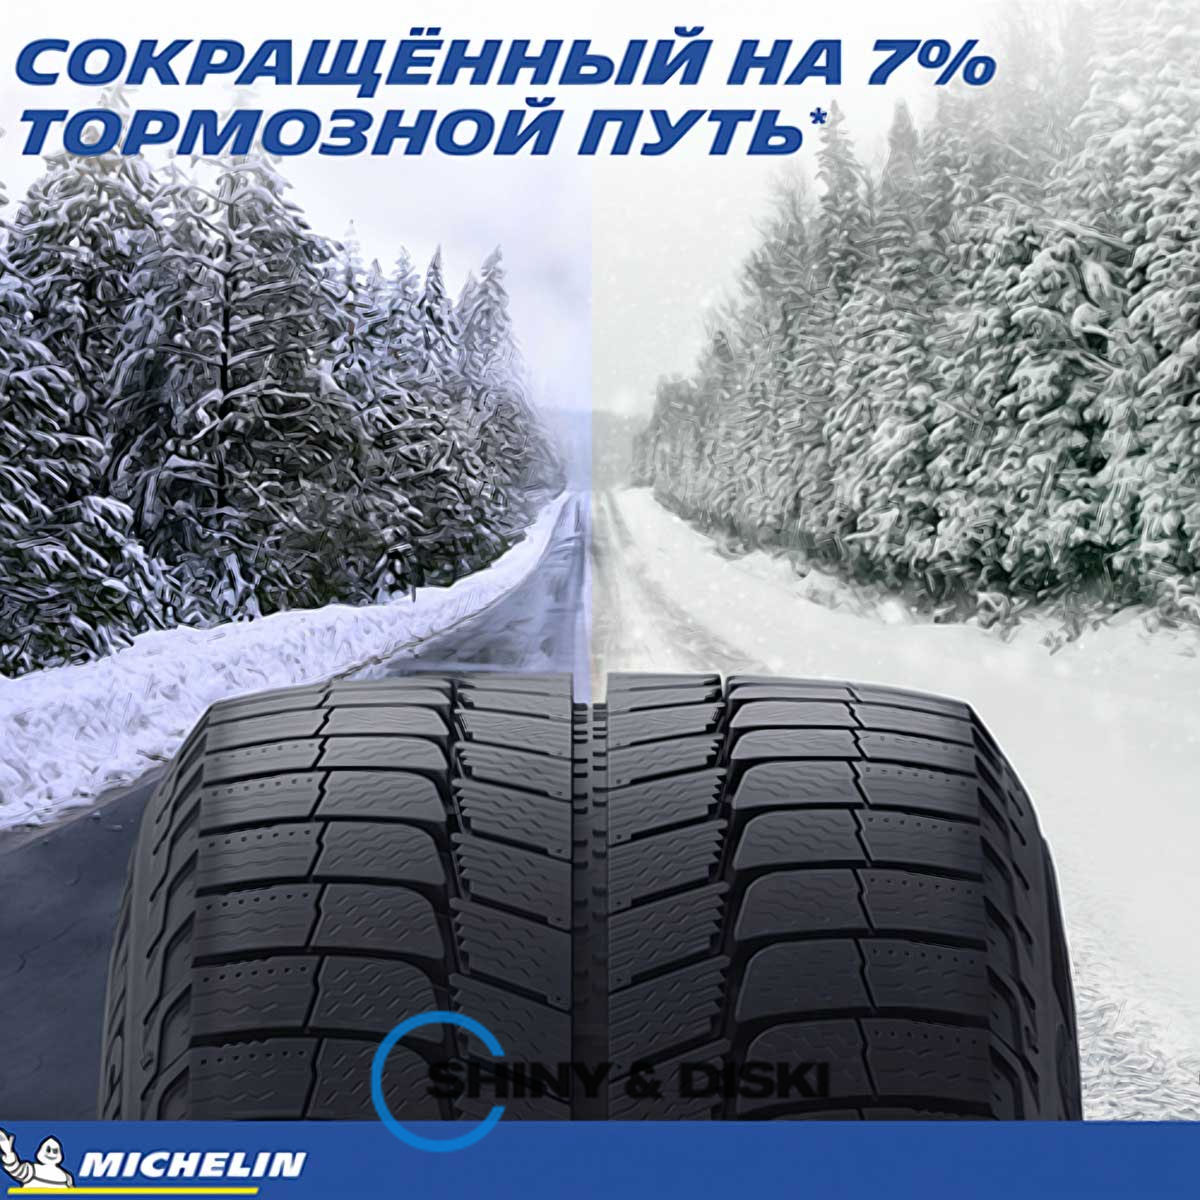 покрышки michelin x-ice xi3+ 225/65 r17 102t